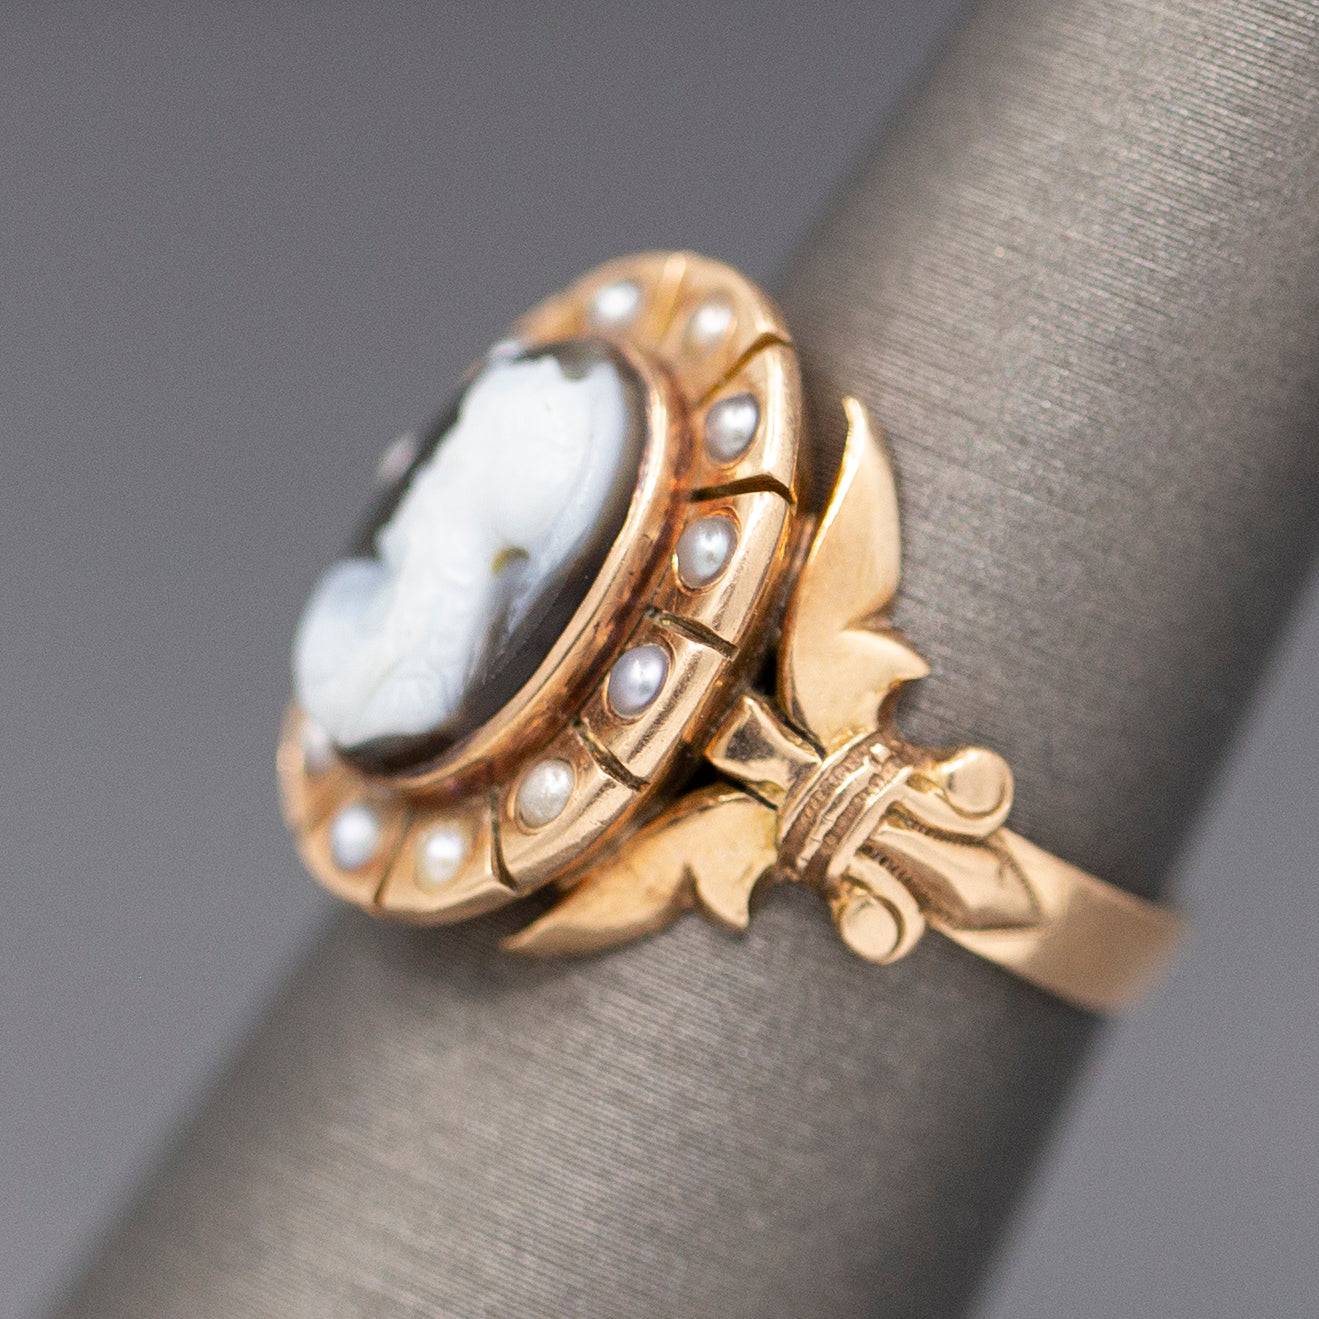 Antique Victorian Mourning Cameo Ring with Pearl Border and Fleur d'Lis in 14k Rose Gold